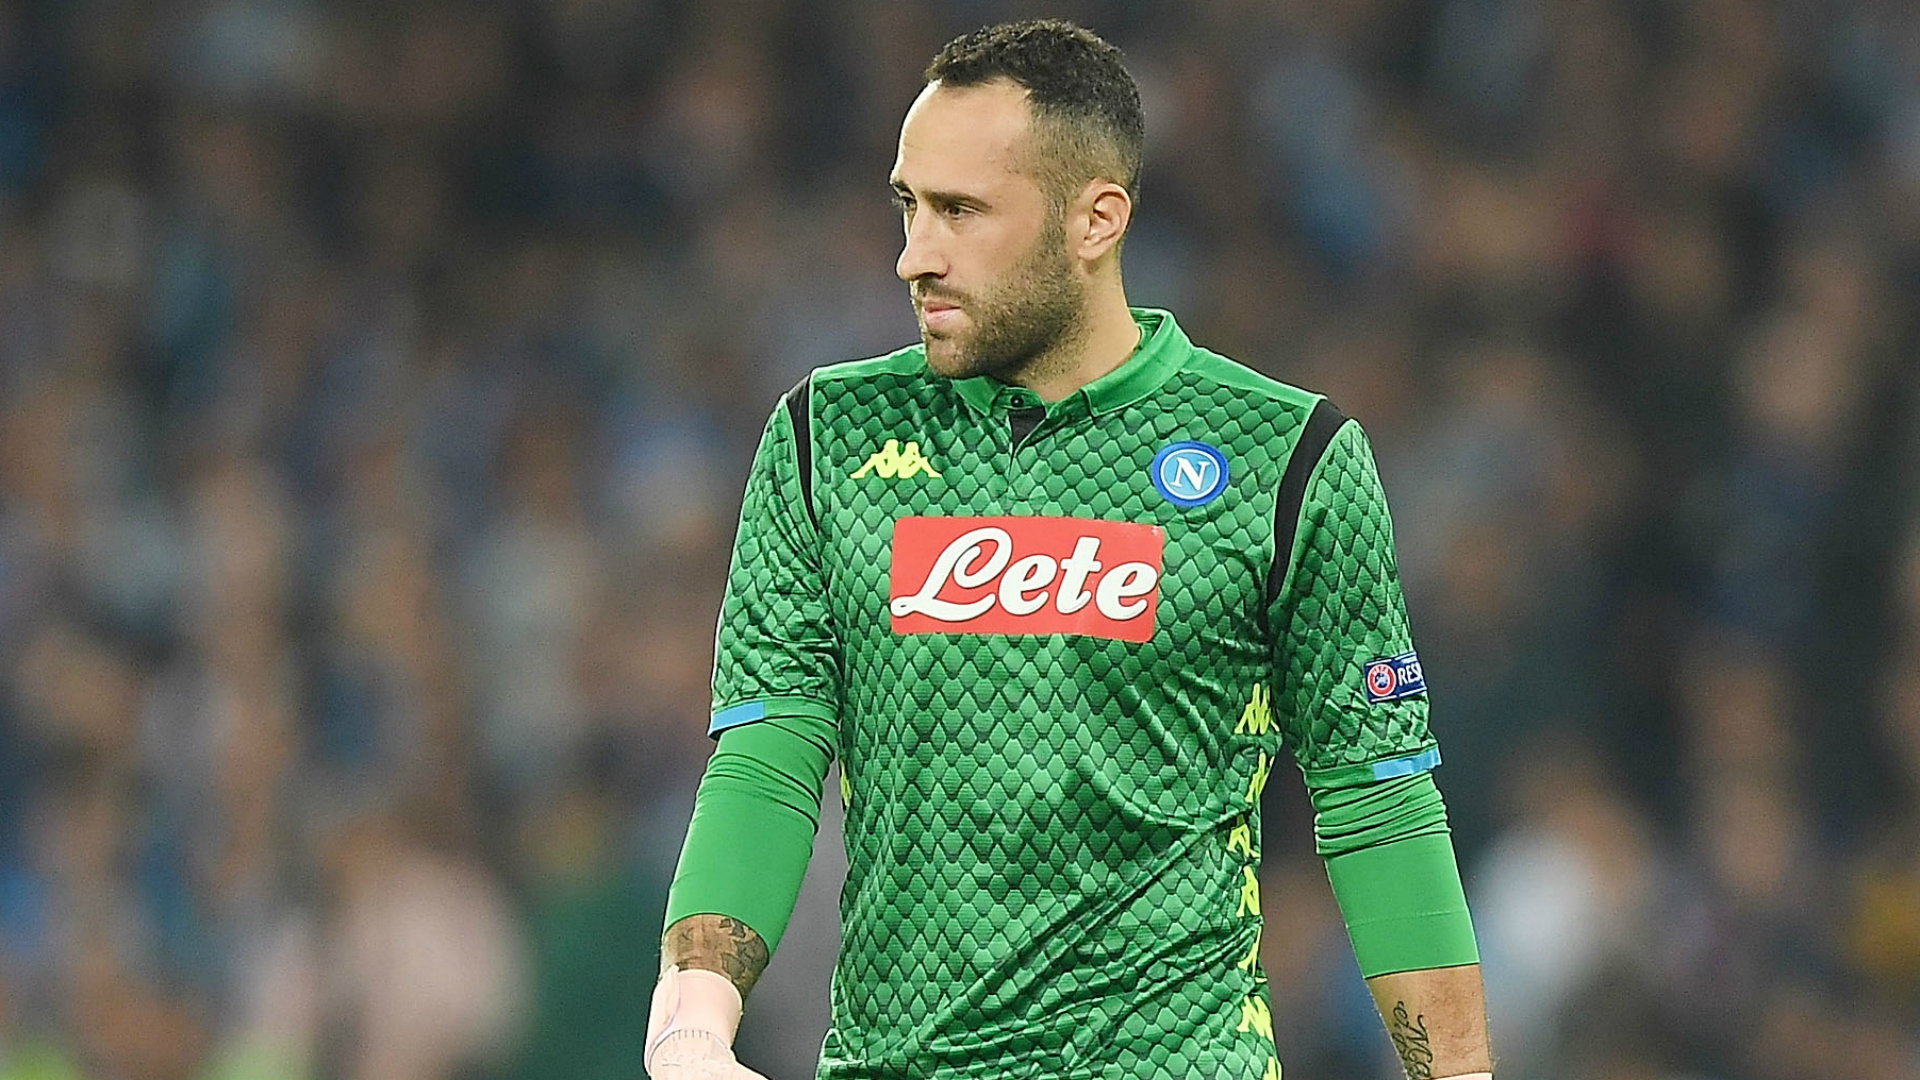 David Ospina, on a season-long loan deal from Arsenal, will be at Napoli next term according to Carlo Ancelotti.